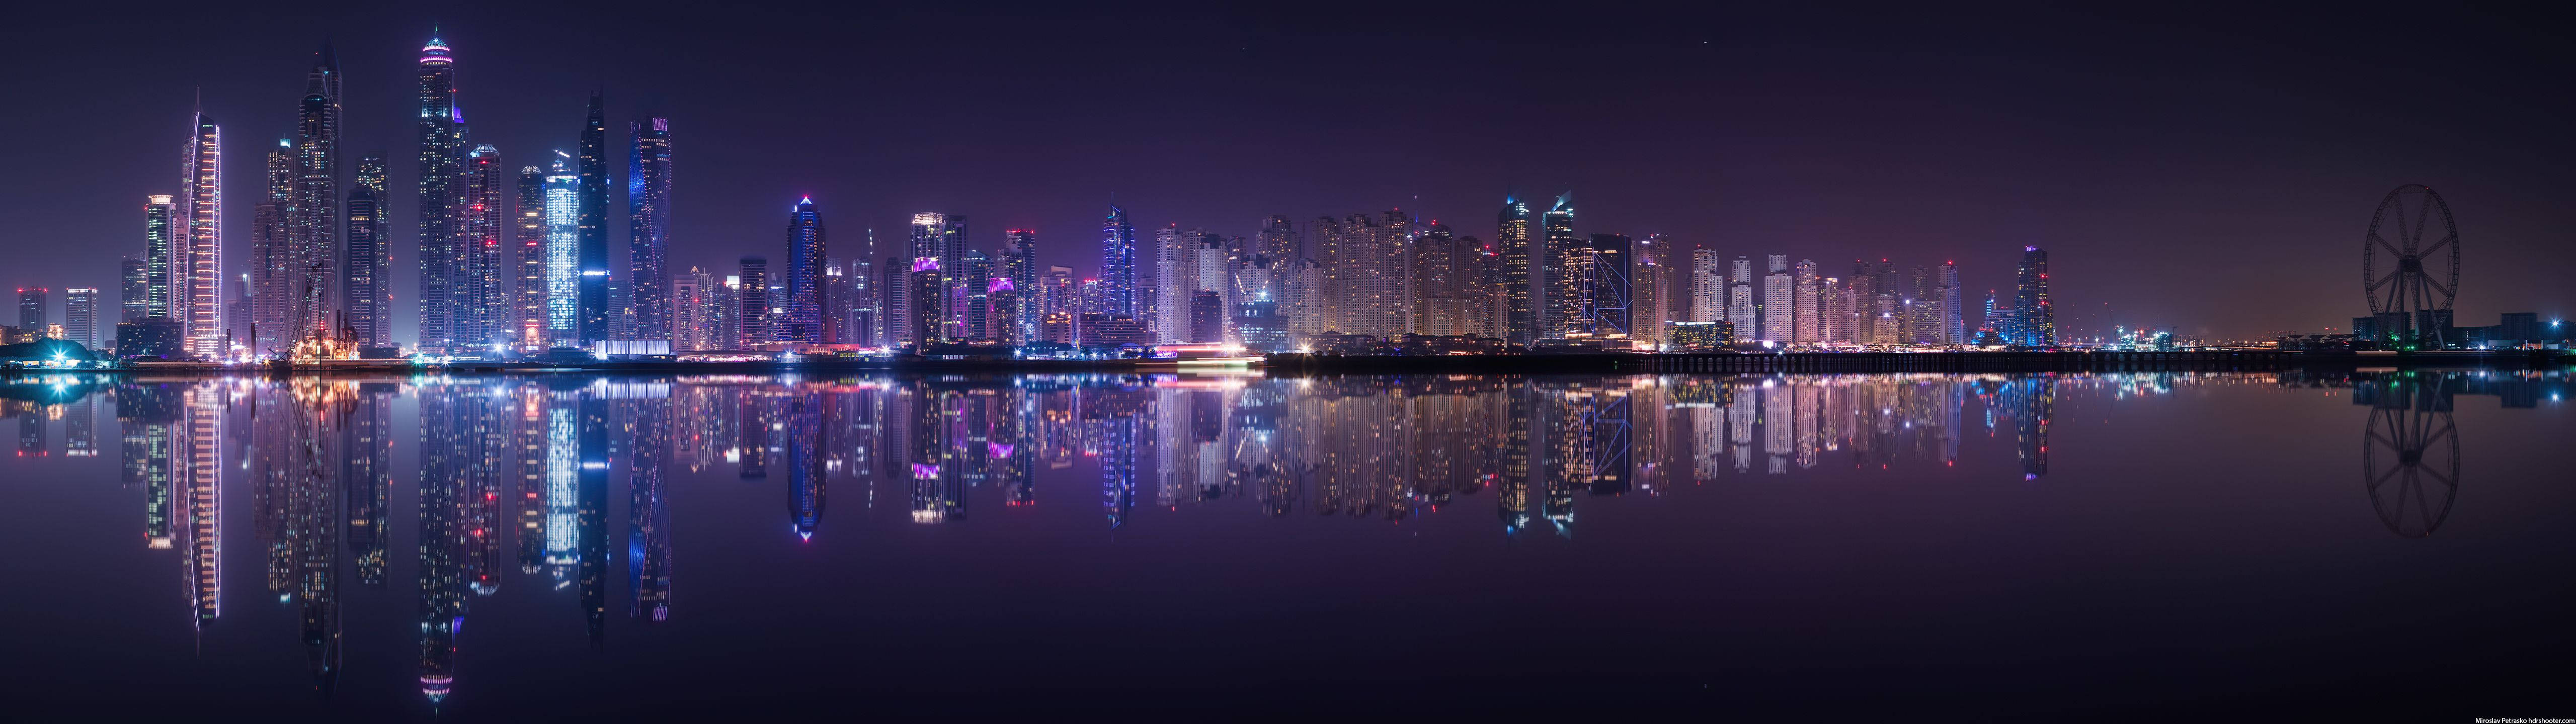 Ultrawide reflection of city lights and tall buildings.